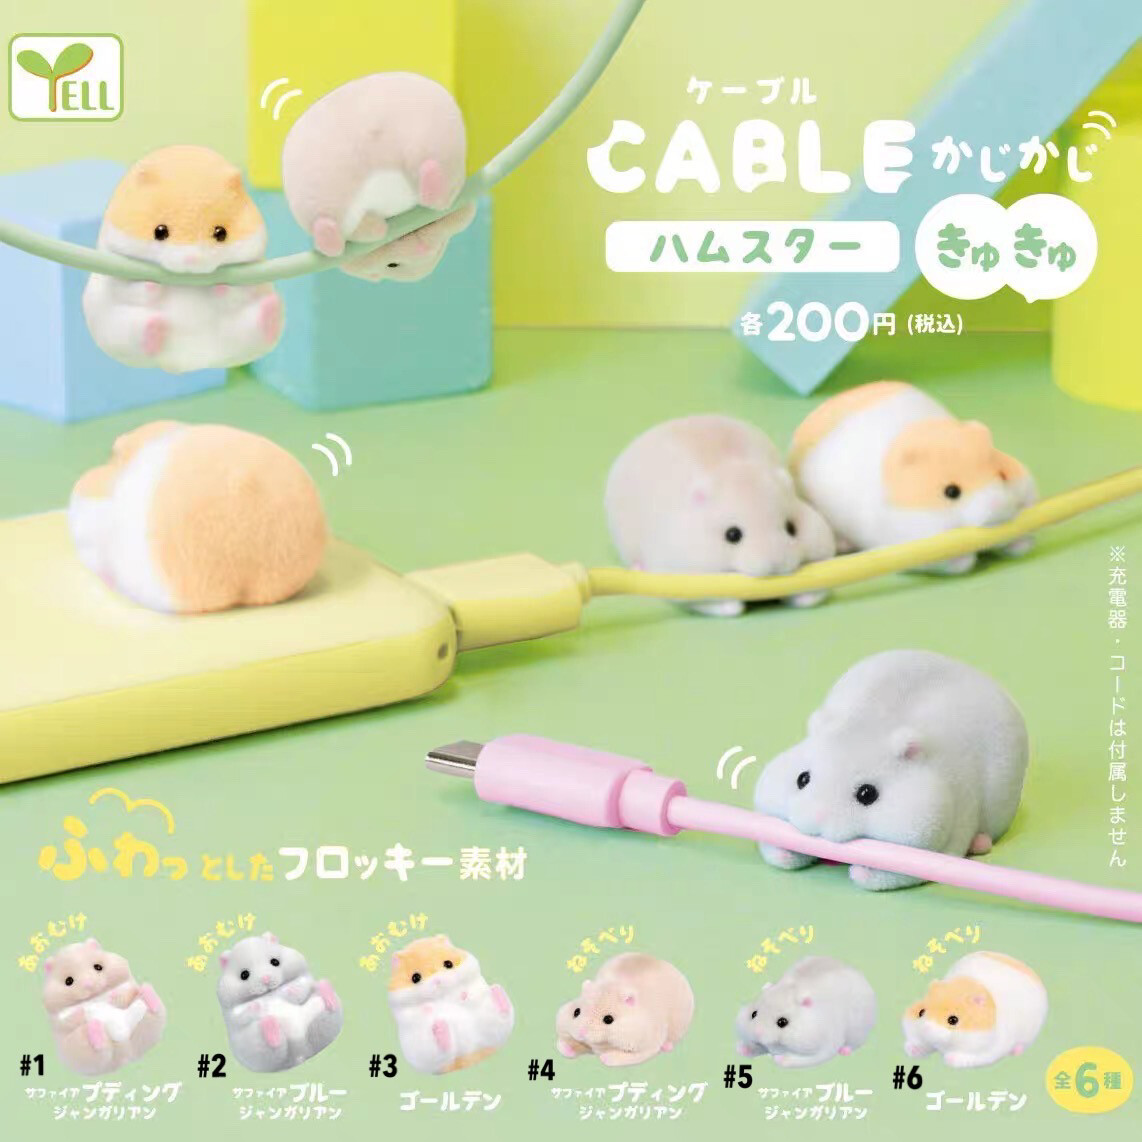 Yell Mini Fuzzy Hamster Cable Mascot Part 2 Gashapon